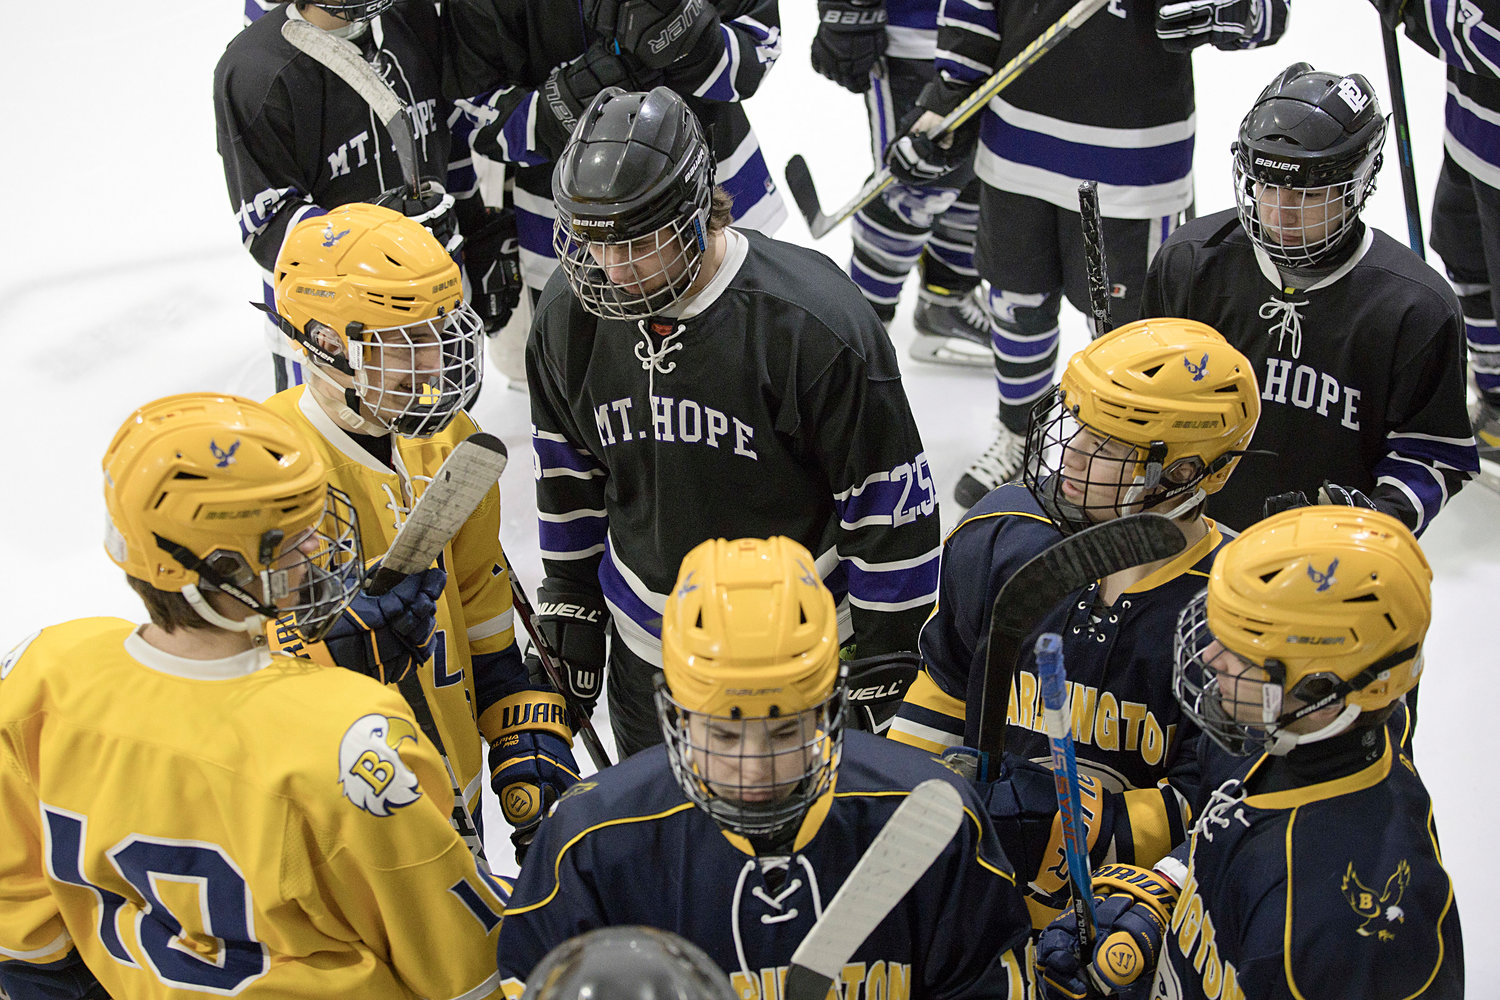 Mt. Hope and Barrington hockey players mingle during the first-ever J.P. Medeiros Jr. Hockey Competition, Saturday.